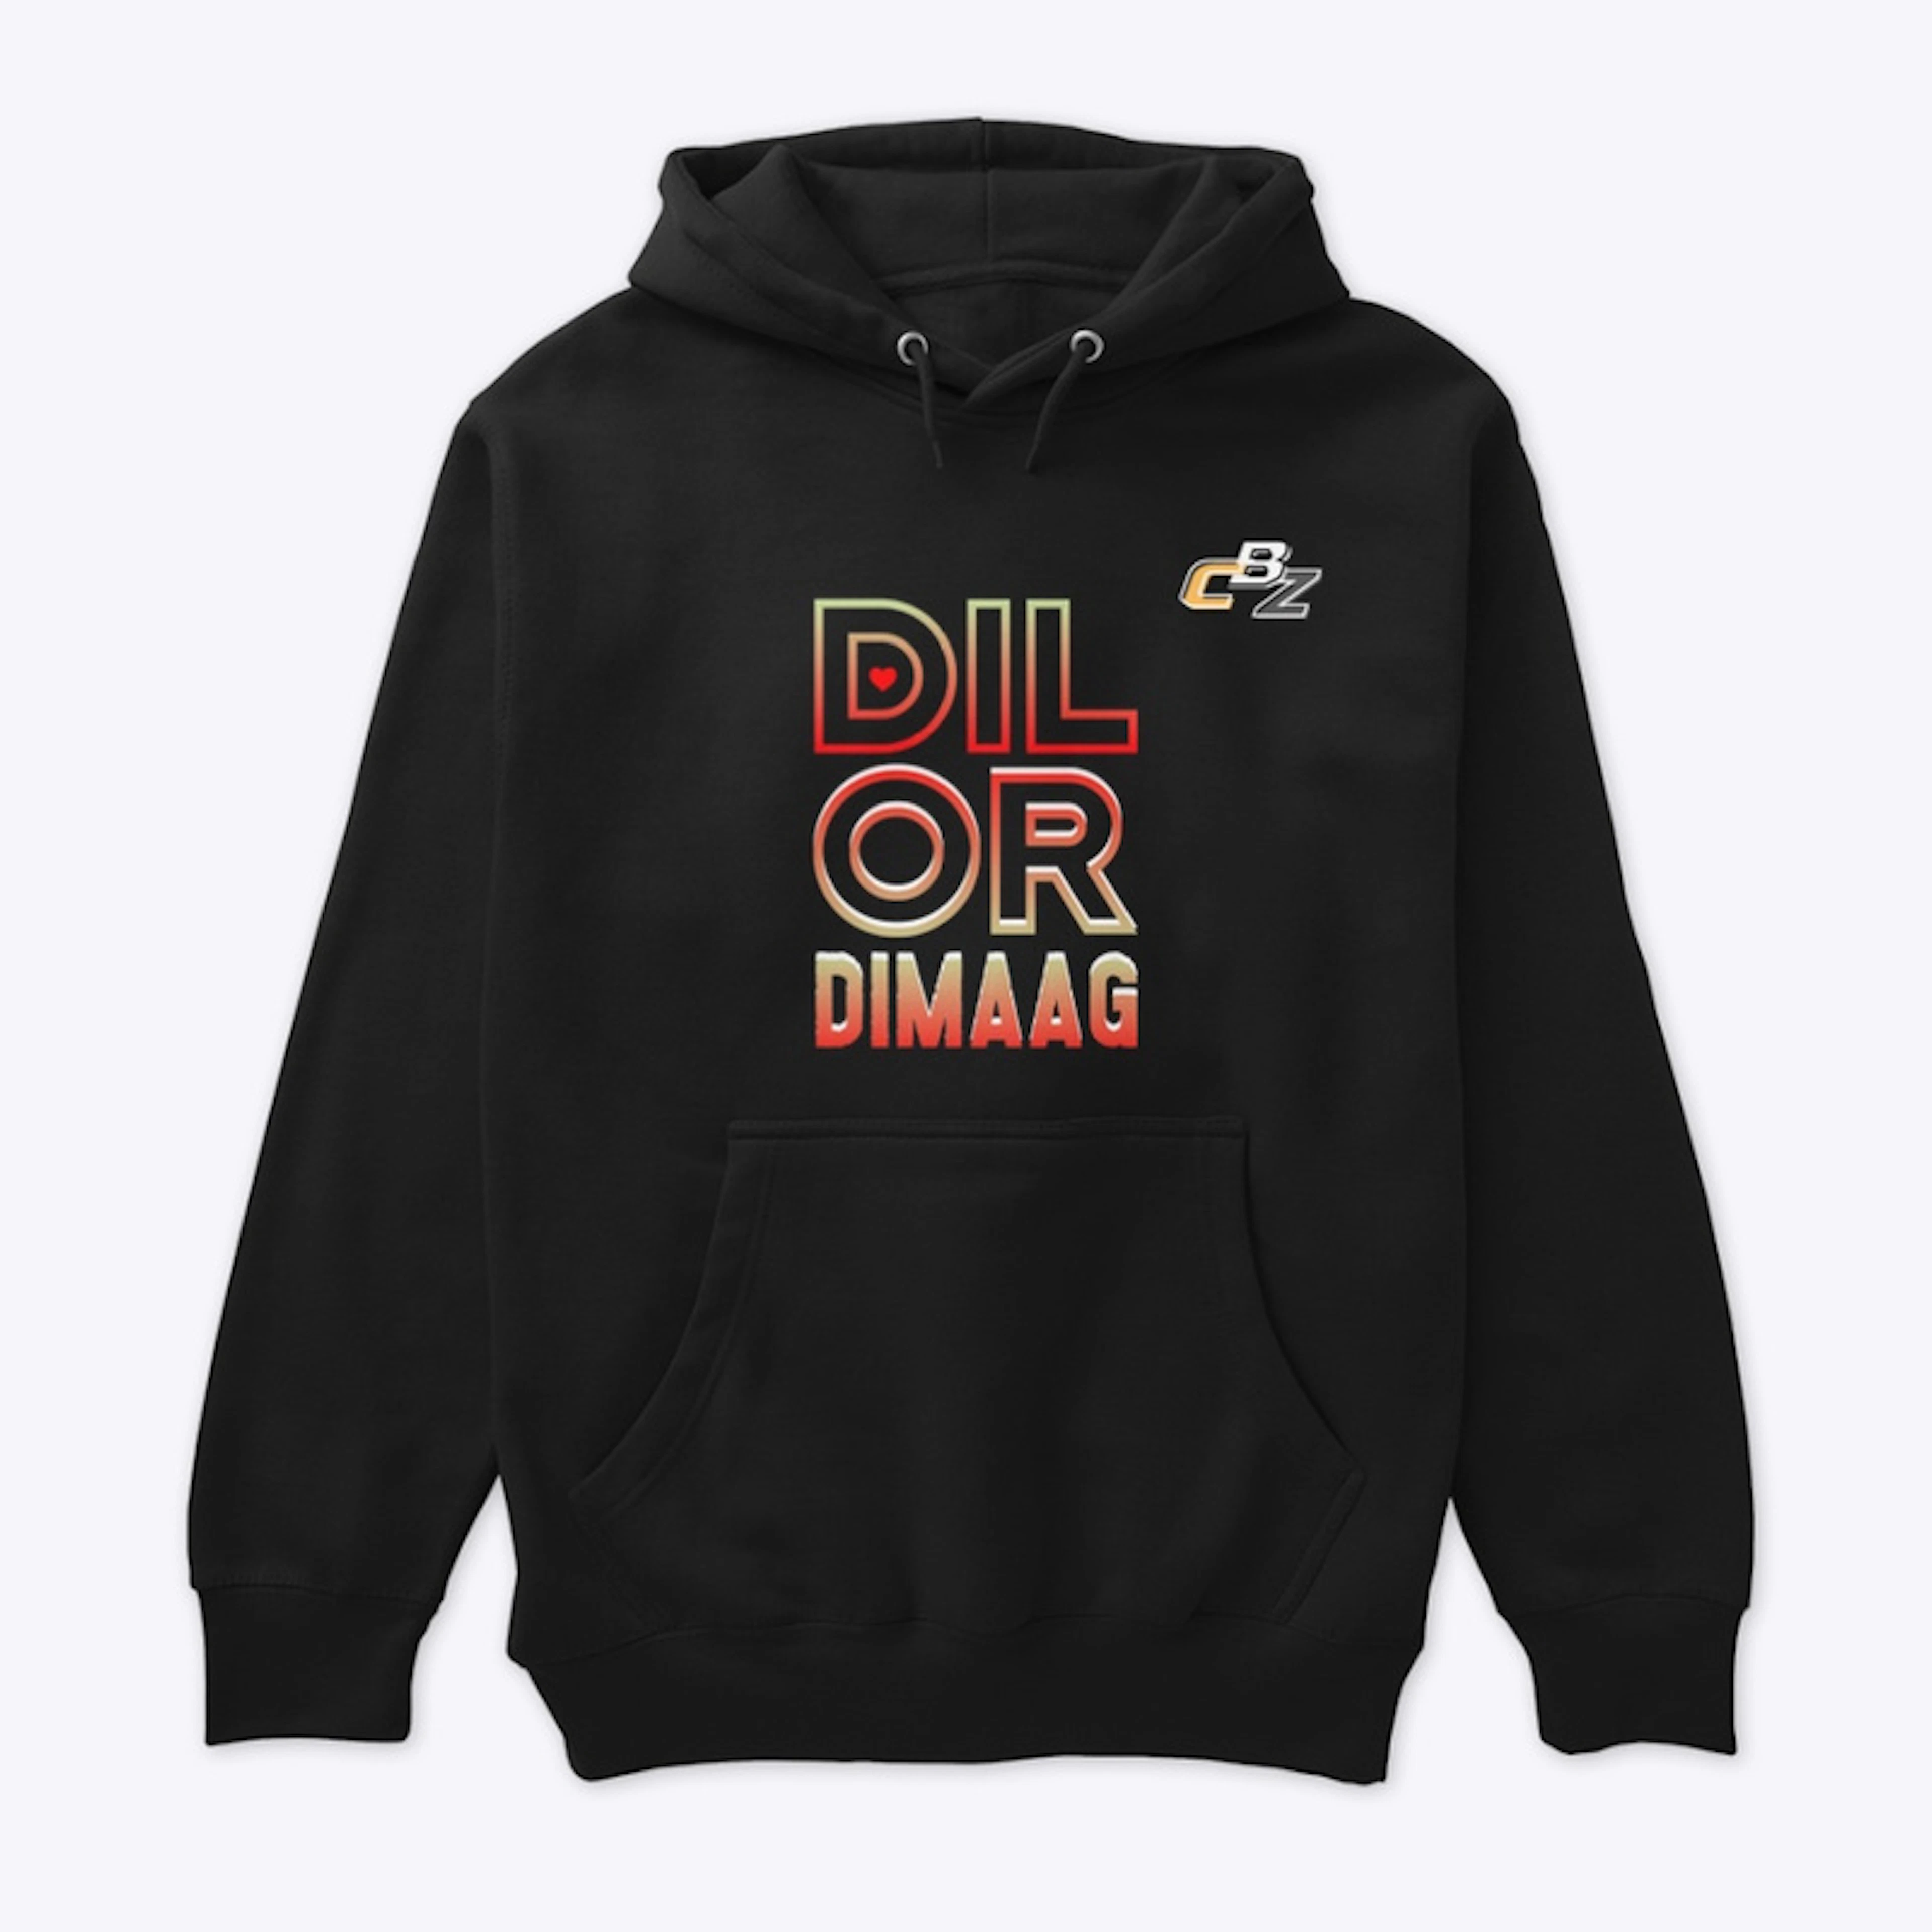 DIL OR DIMAAG